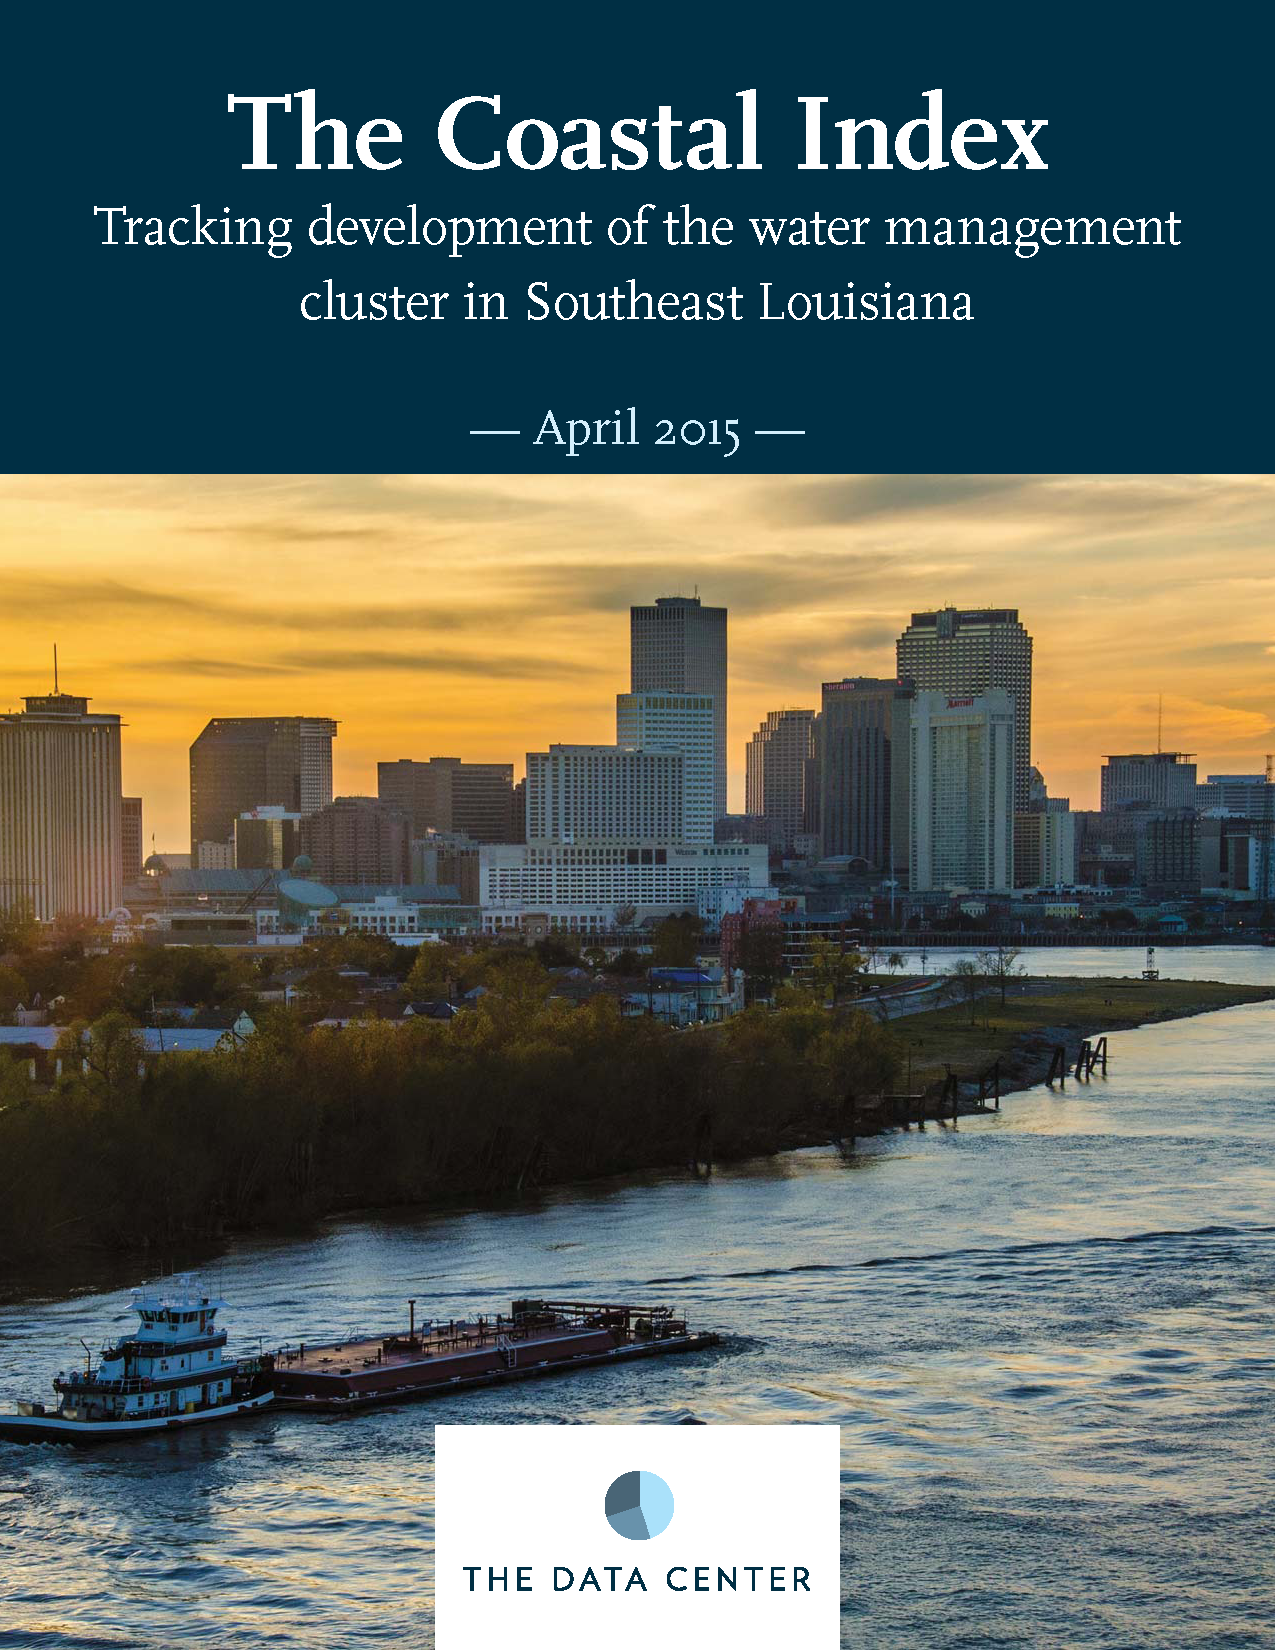 The Coastal Index: Tracking development of the water management cluster in Southeast Louisiana